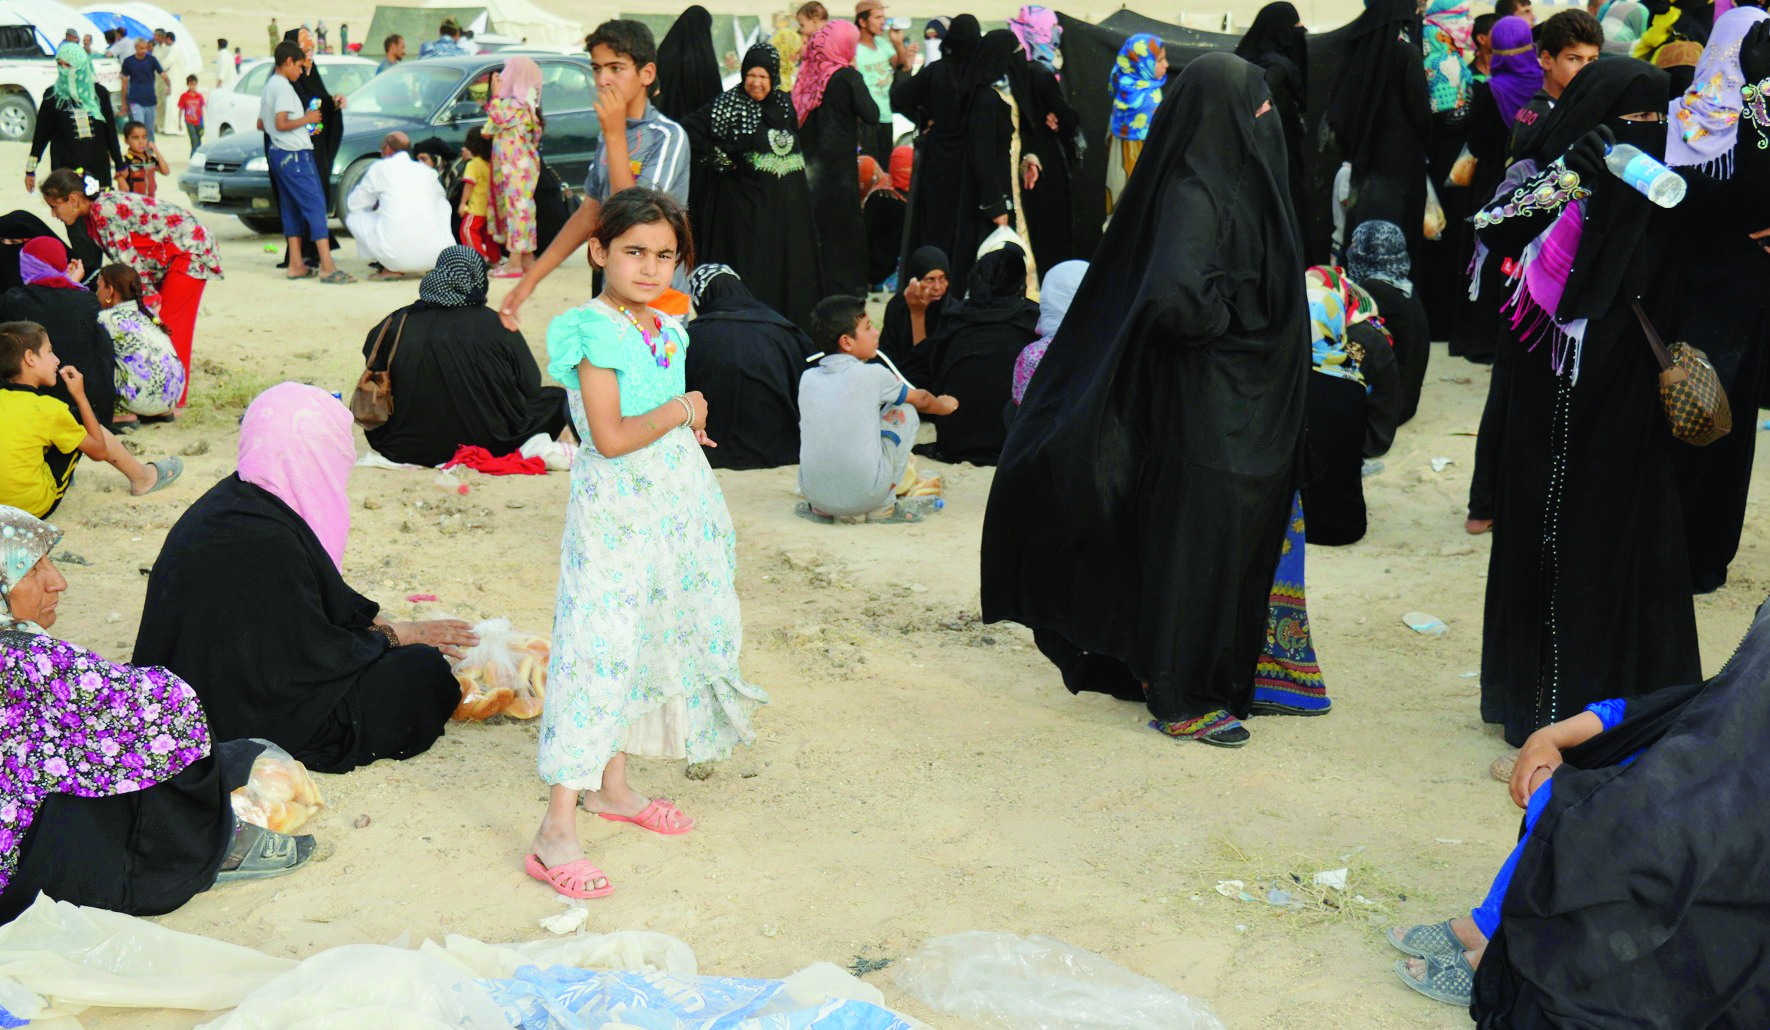 Internally displaced civilians from Fallujah, who fled their homes during fighting between Iraqi security forces and Islamic State group, arrive to a camp outside Fallujah, Iraq, Monday, June 20, 2016.  The U.N. refugee agency says just over 65 million people were displaced worldwide by the end of last year, easily setting a new postwar record, as it warned that European and other rich nations can expect the tide to continue if root causes aren't addressed. (AP Photo) United Nations Refugees